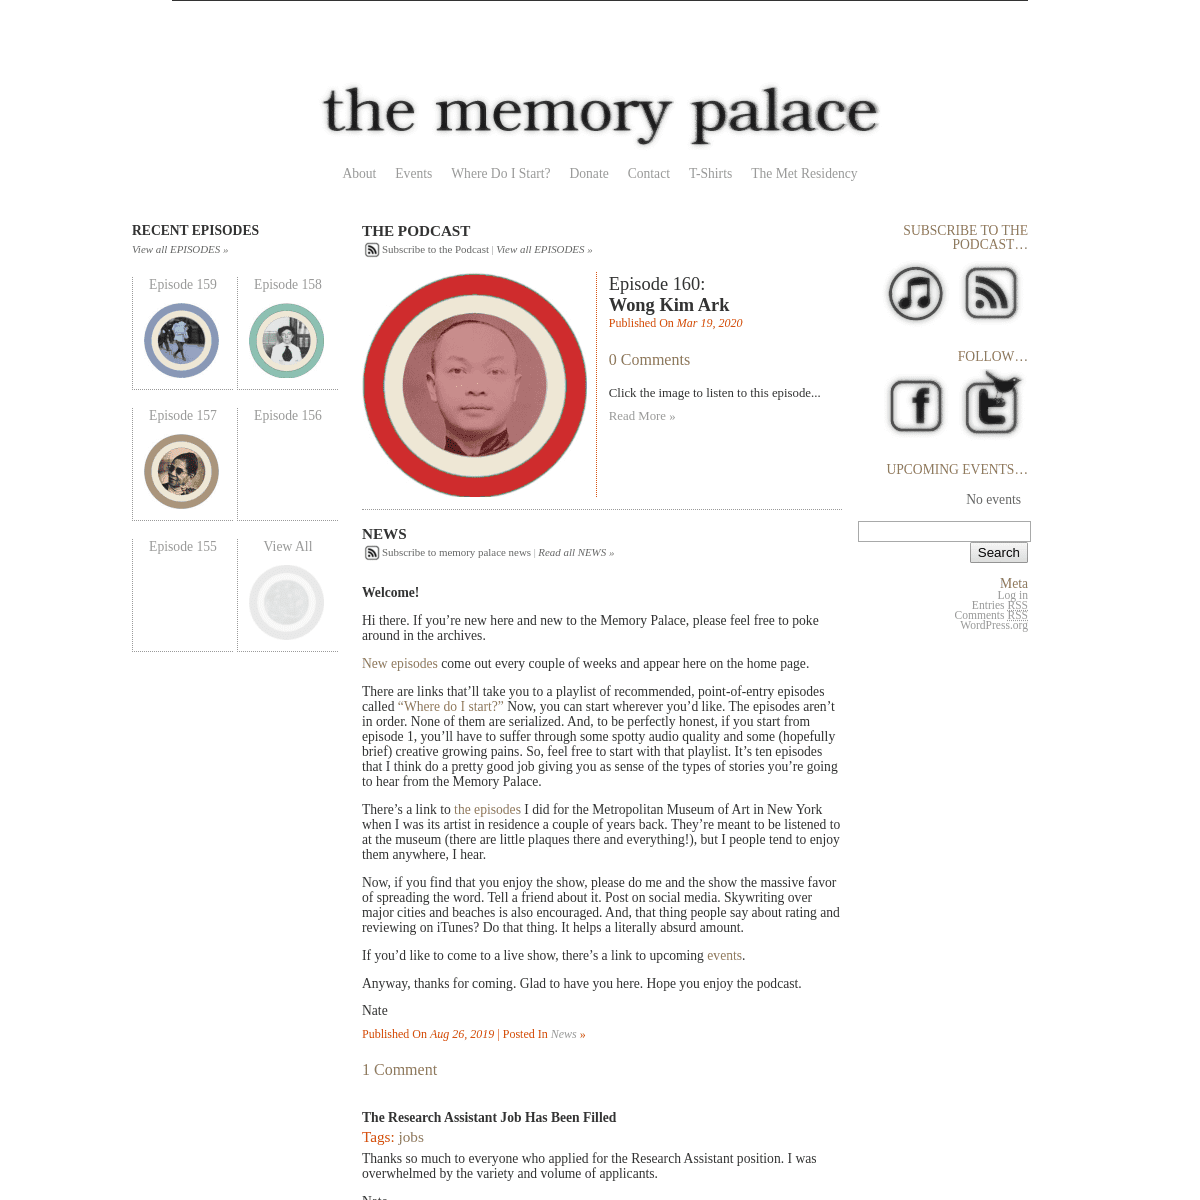 A complete backup of thememorypalace.us